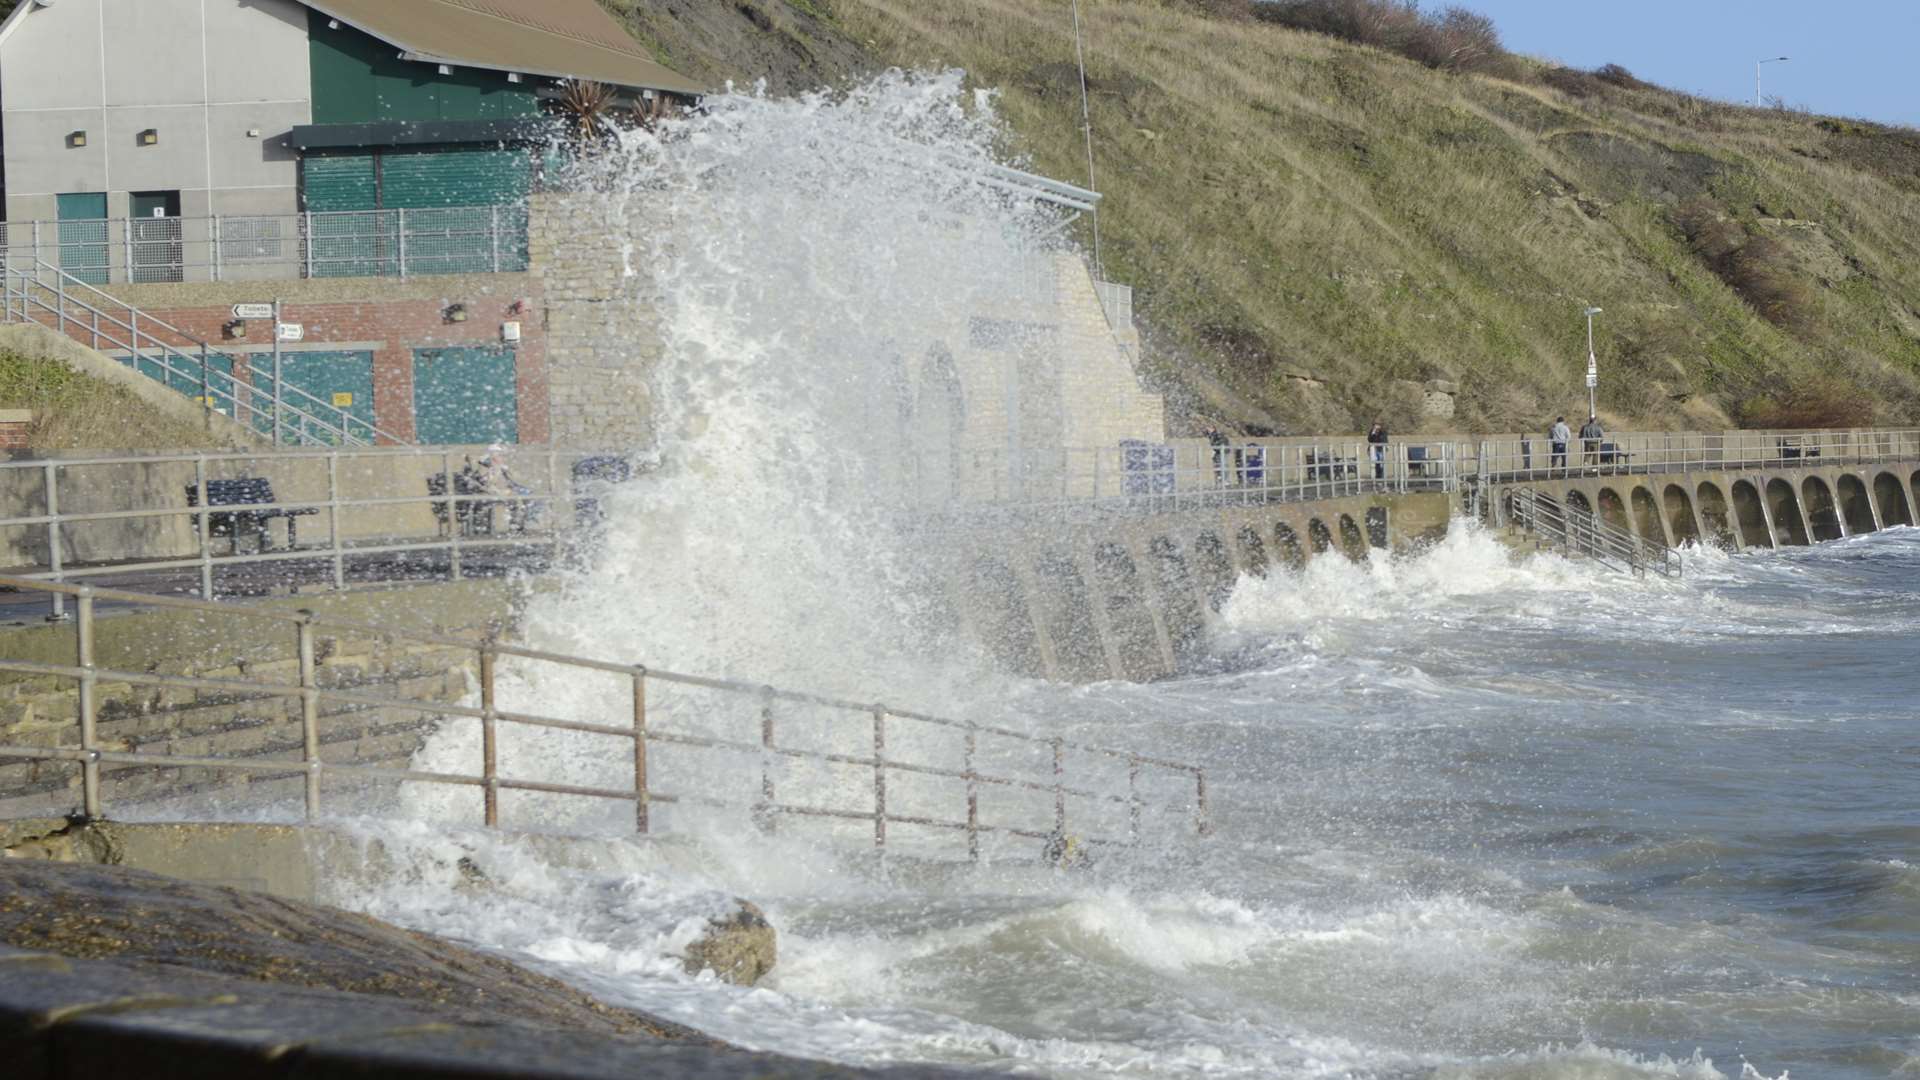 Kent is set for strong winds as Storm Imogen arrives in the UK.